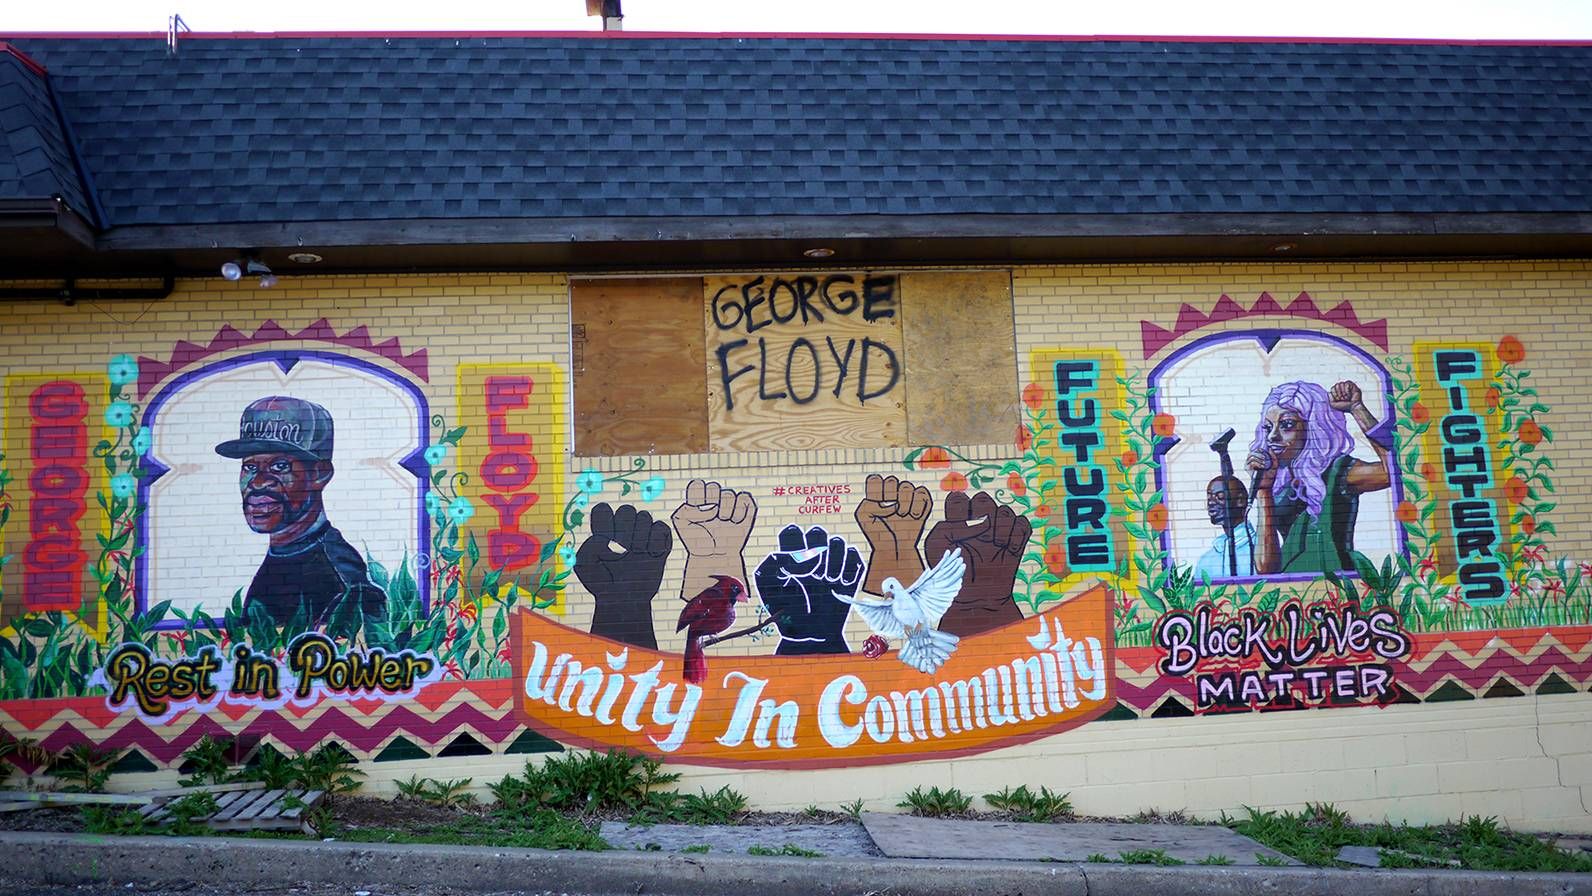 A colorful mural with the words "Unity in the Community" at the center.